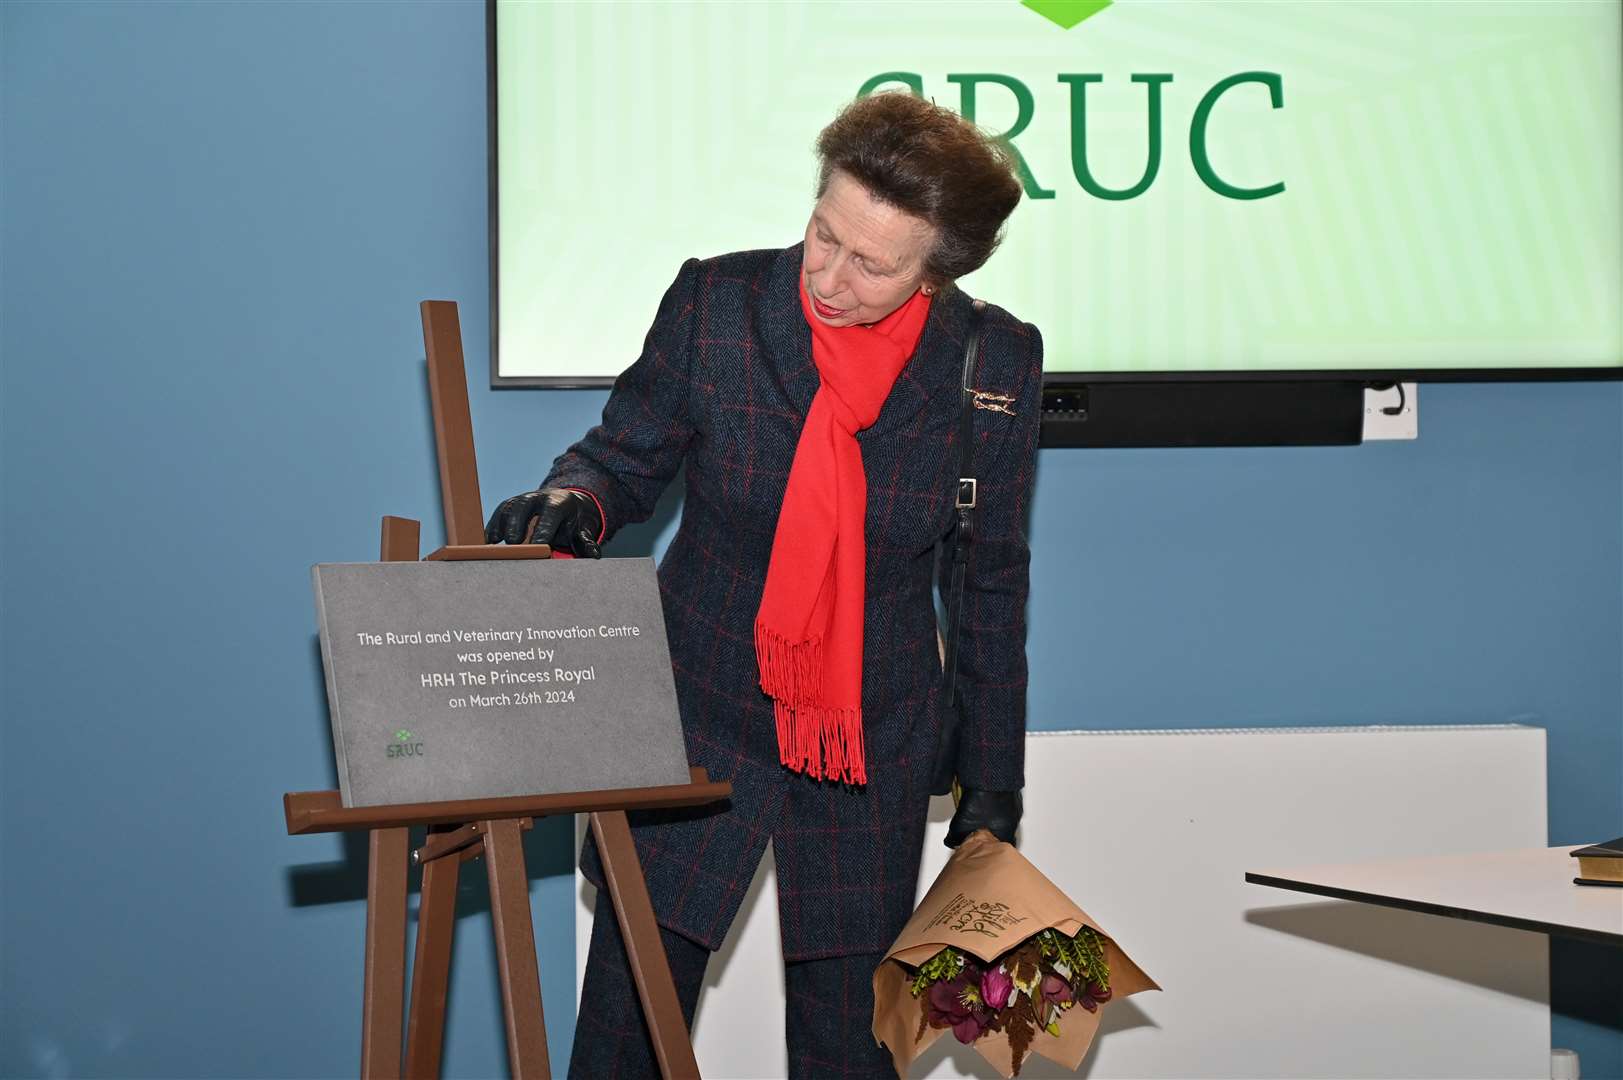 Princess Anne presenting a plaque at the opening of the Rural and Veterinary Innovation Centre in Inverness.